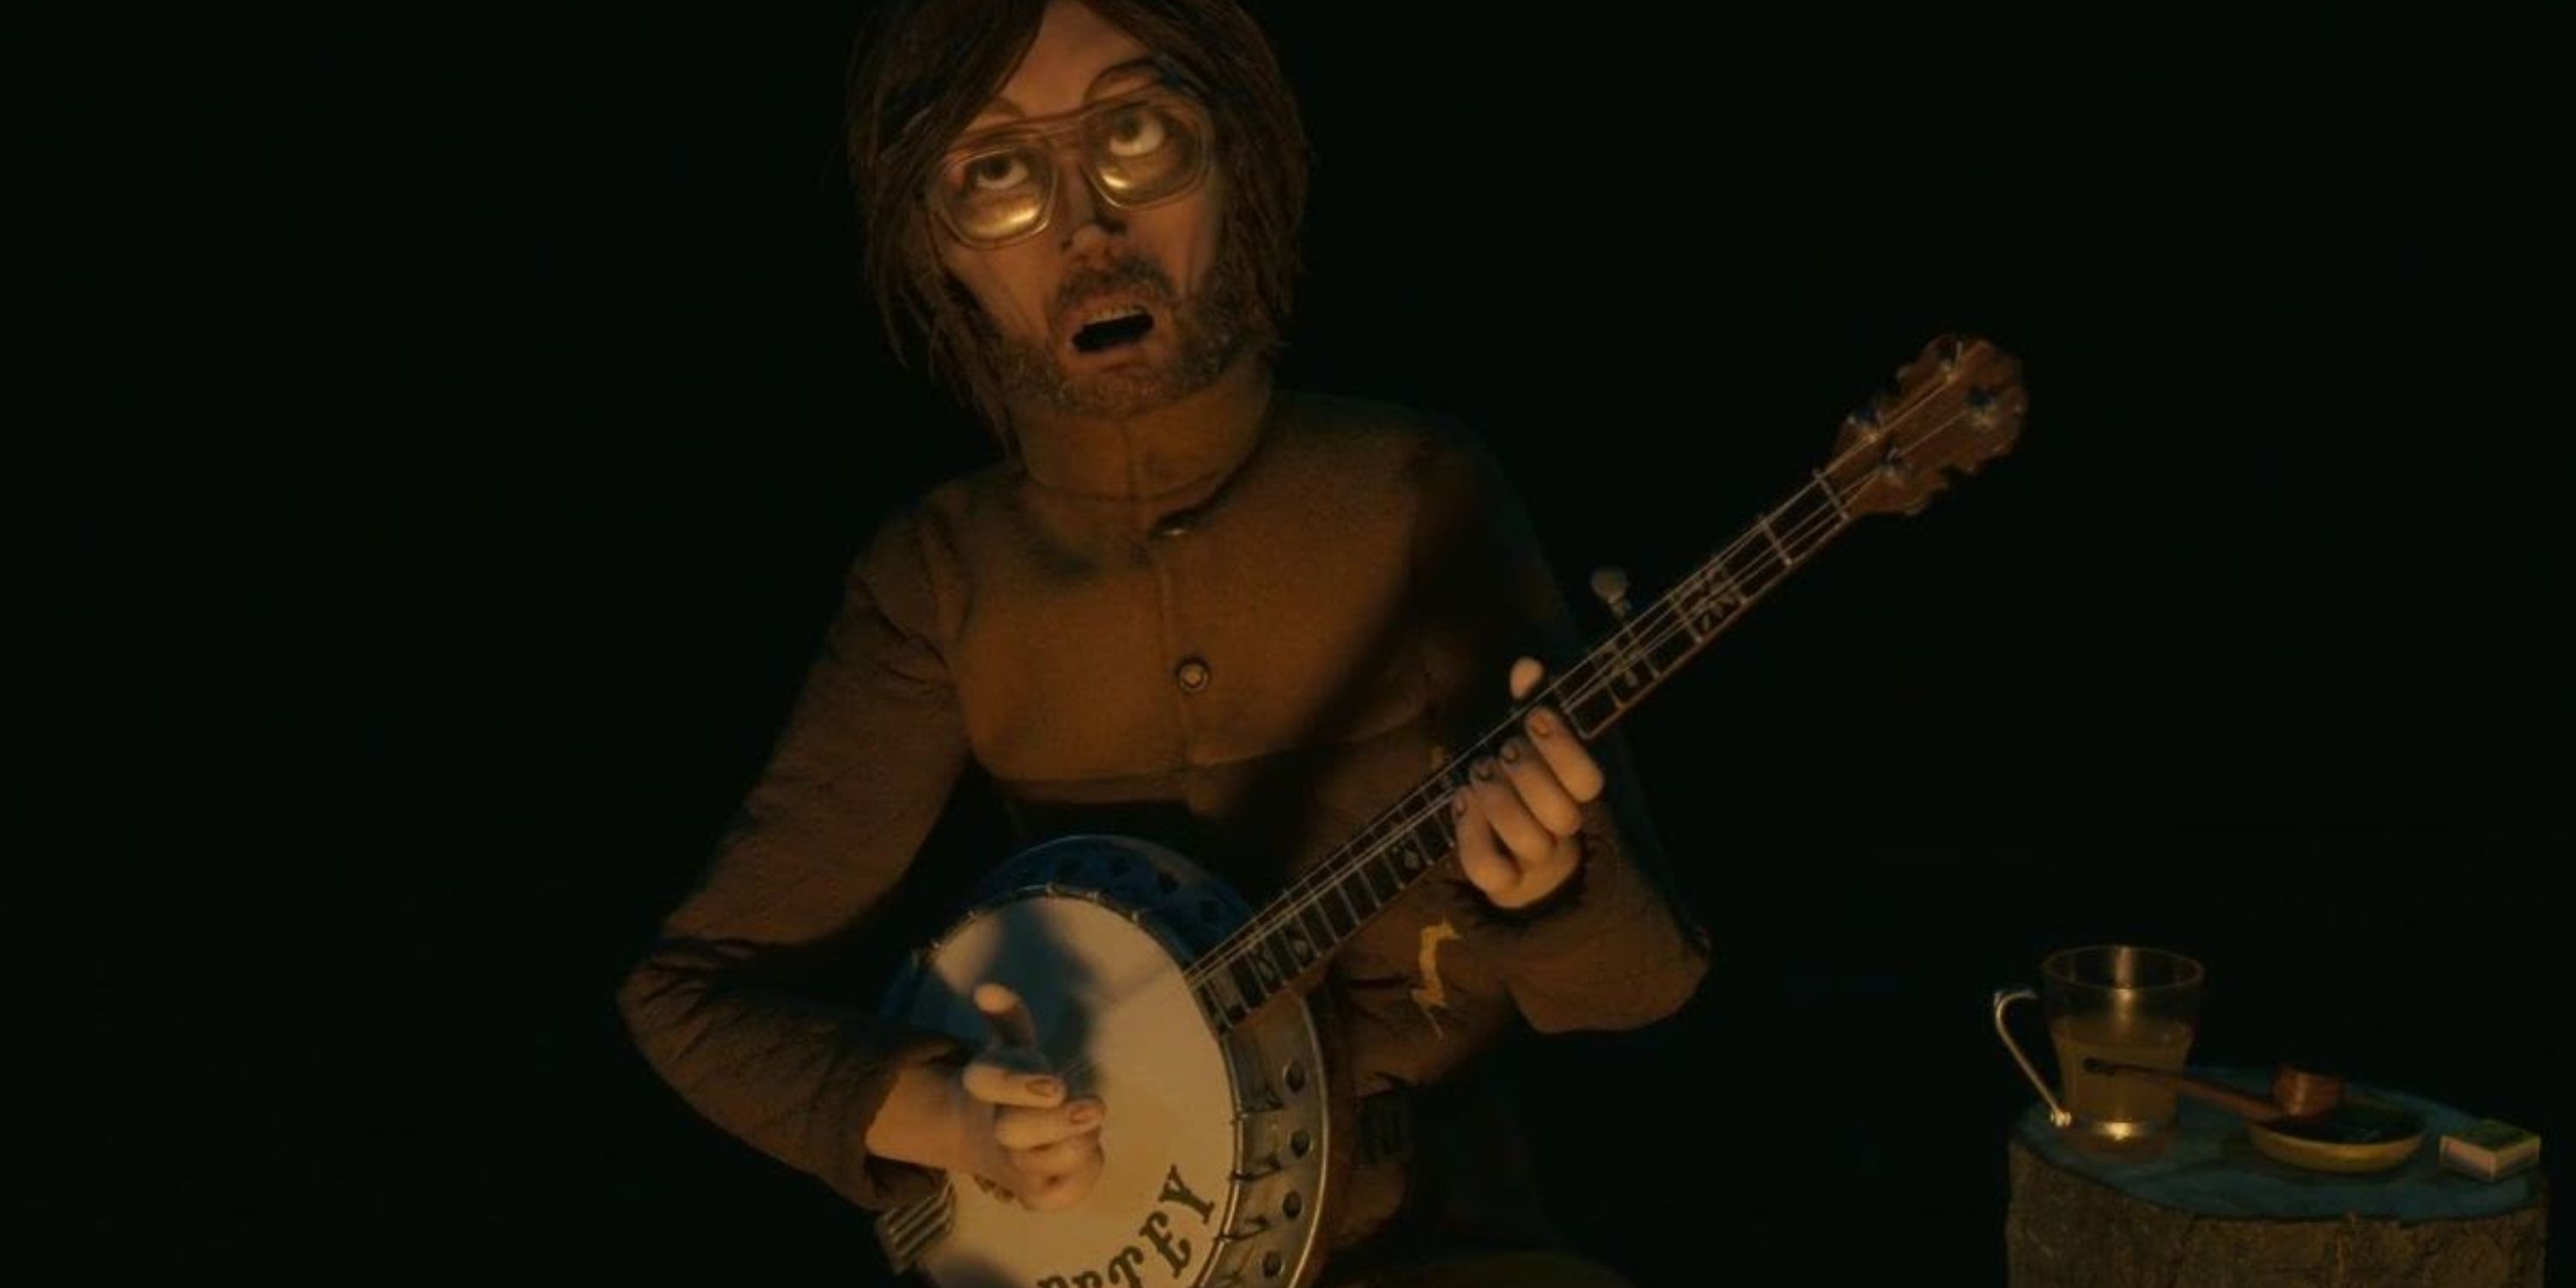 Petey playing the guitar in Fantastic Mr Fox.